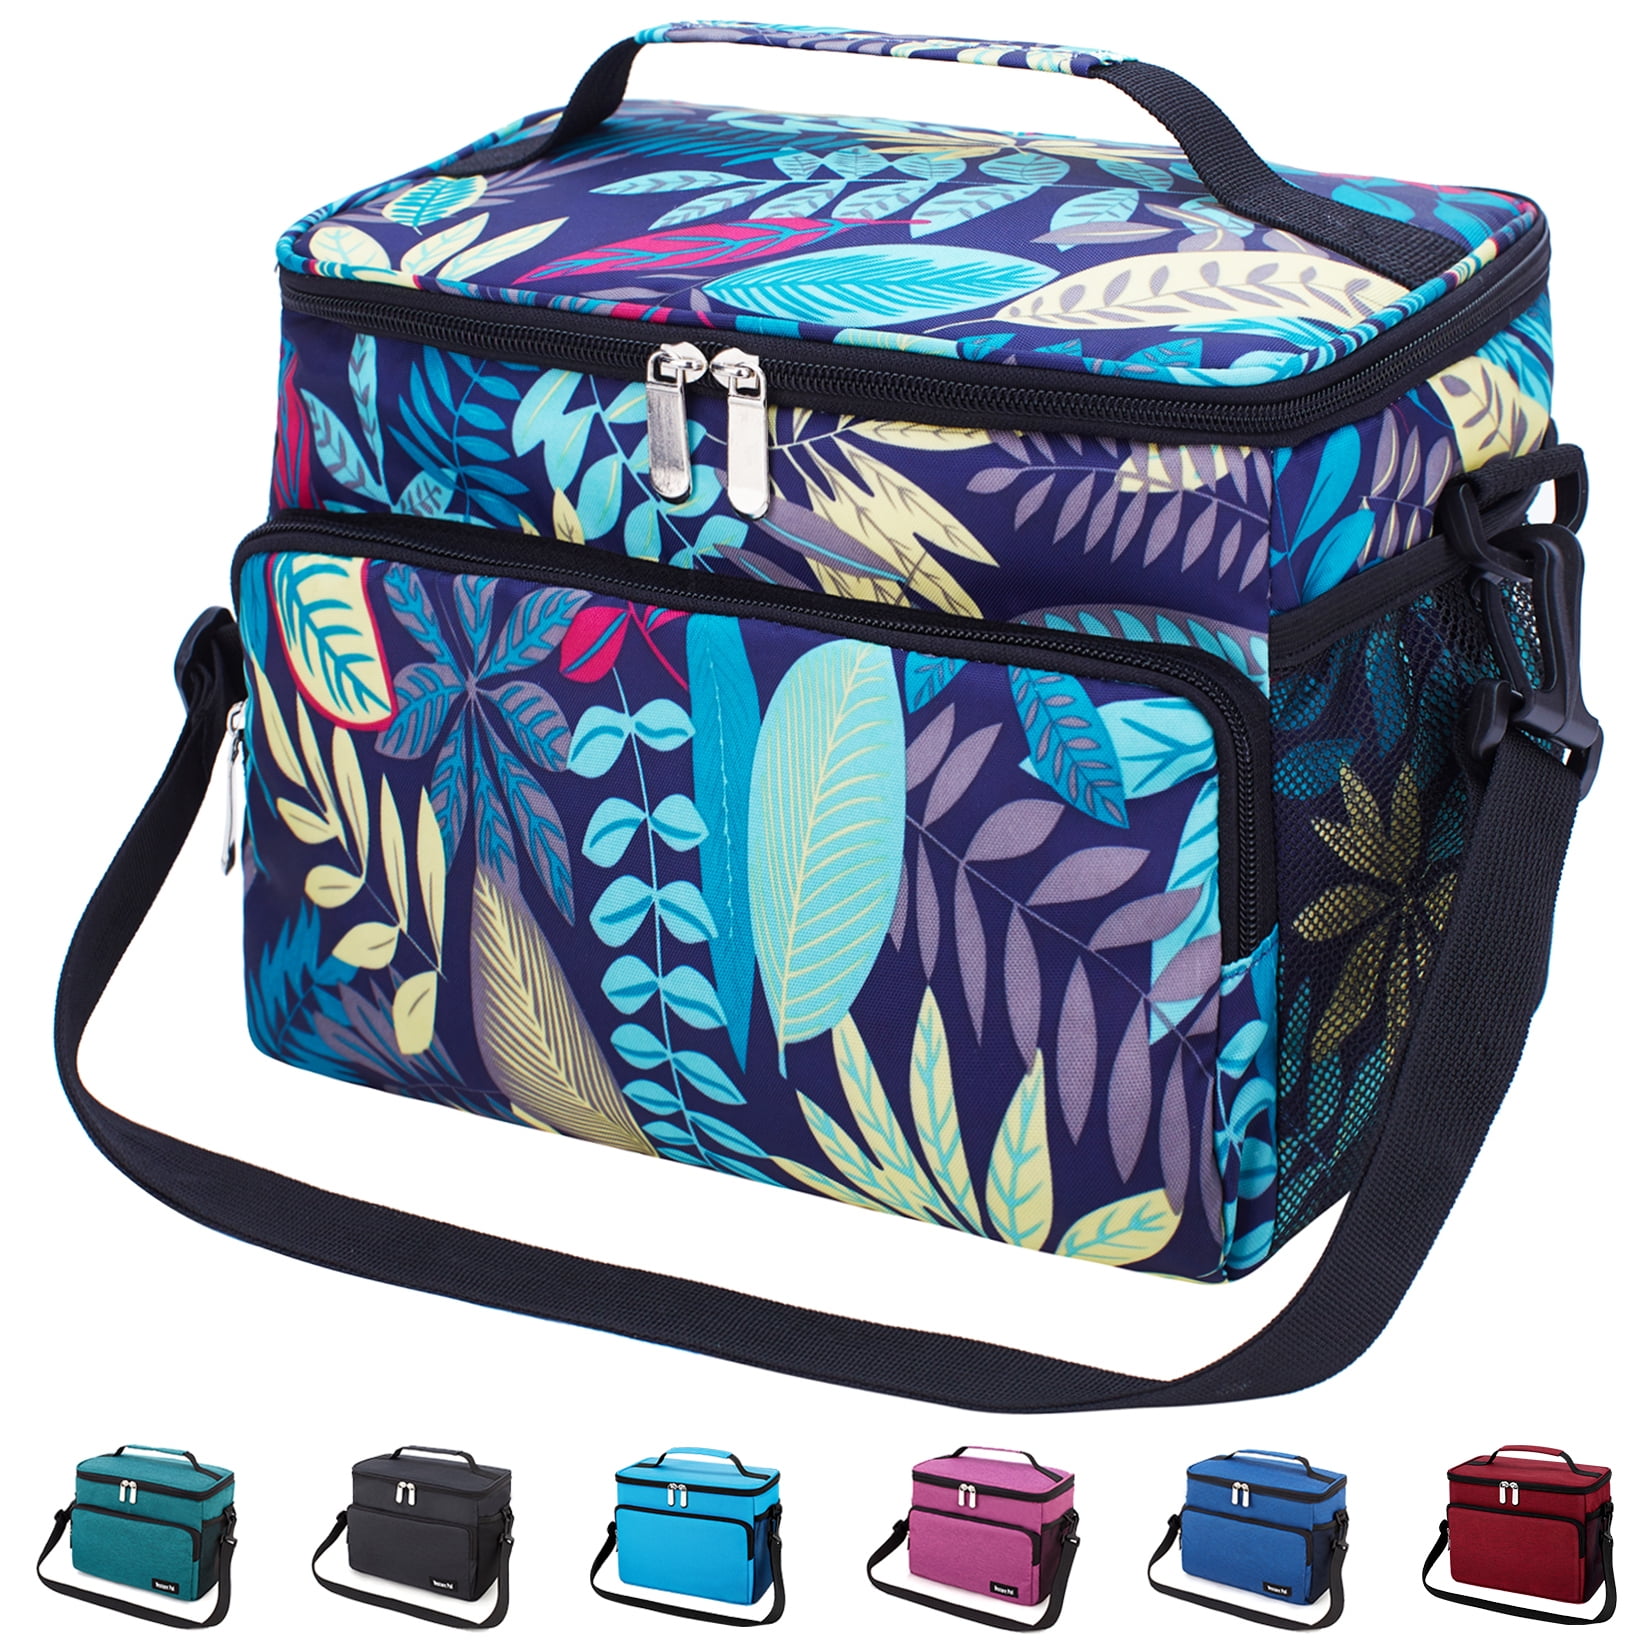 JUMBEAR 15L Leakproof Reusable Insulated Cooler Lunch Bag Office Work Picnic Hiking Beach Lunch Box Organizer with Adjustable